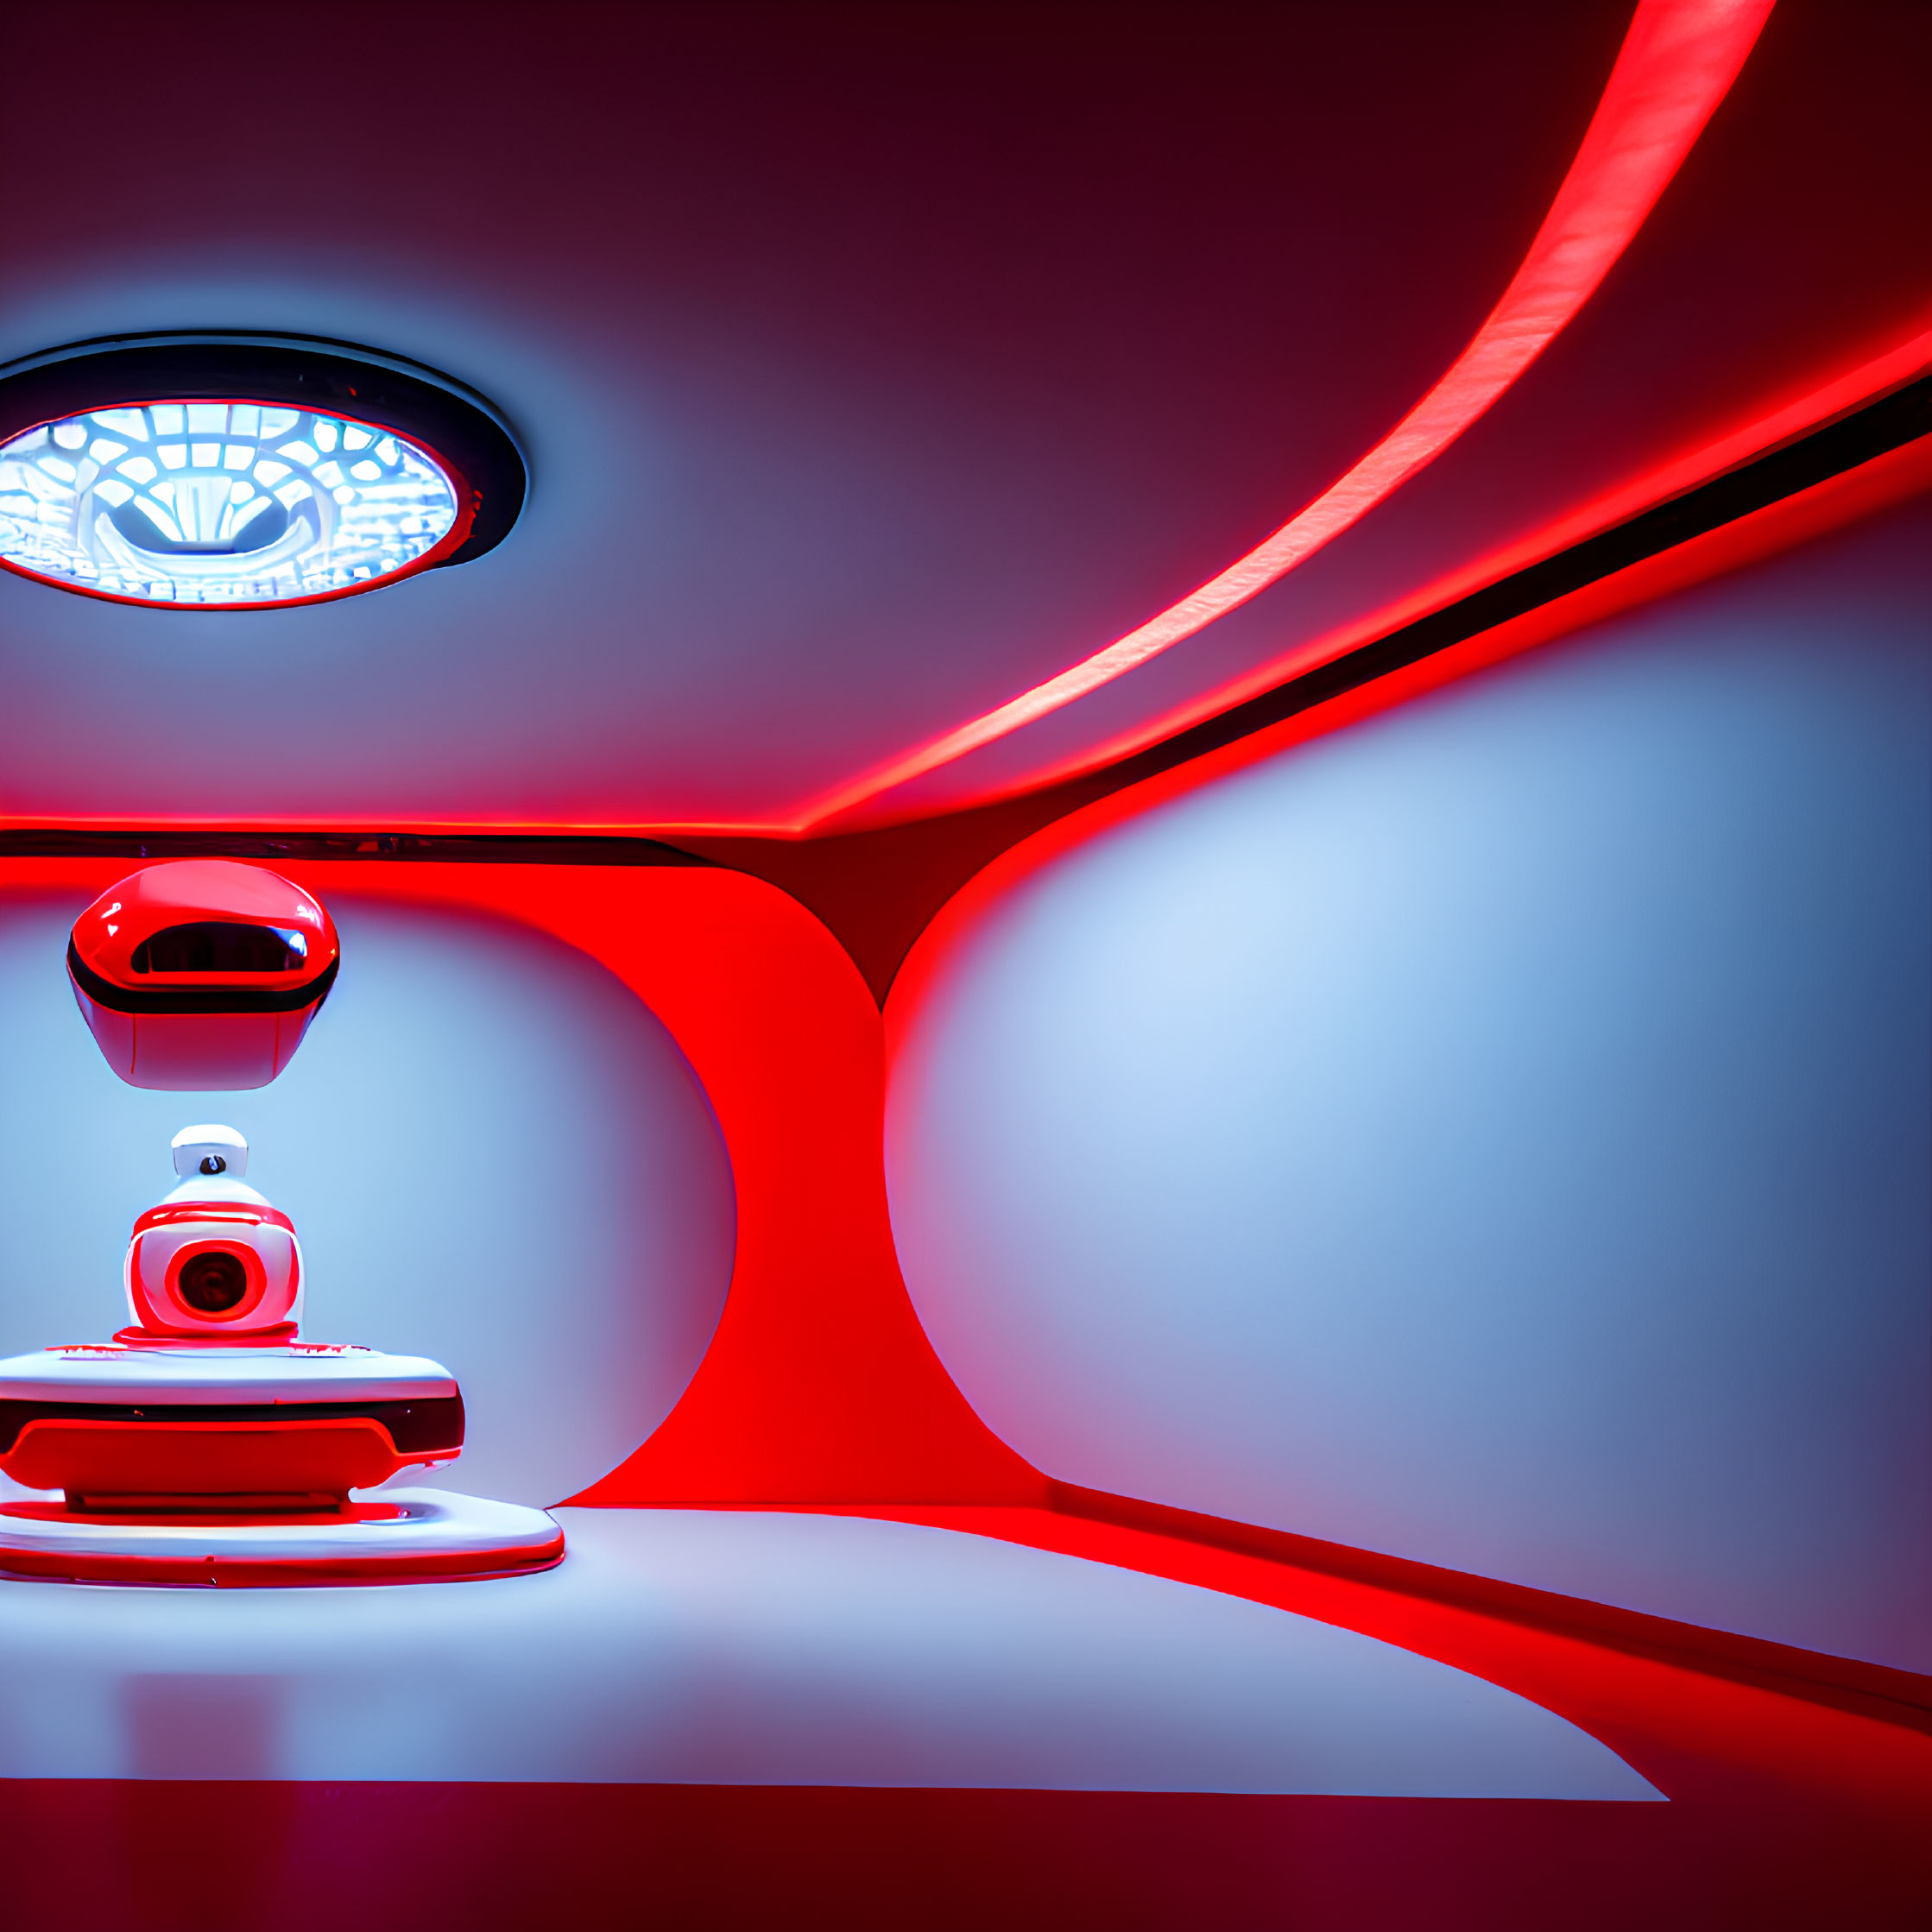 Futuristic Red and White Interior with Surveillance Camera and Ceiling Light